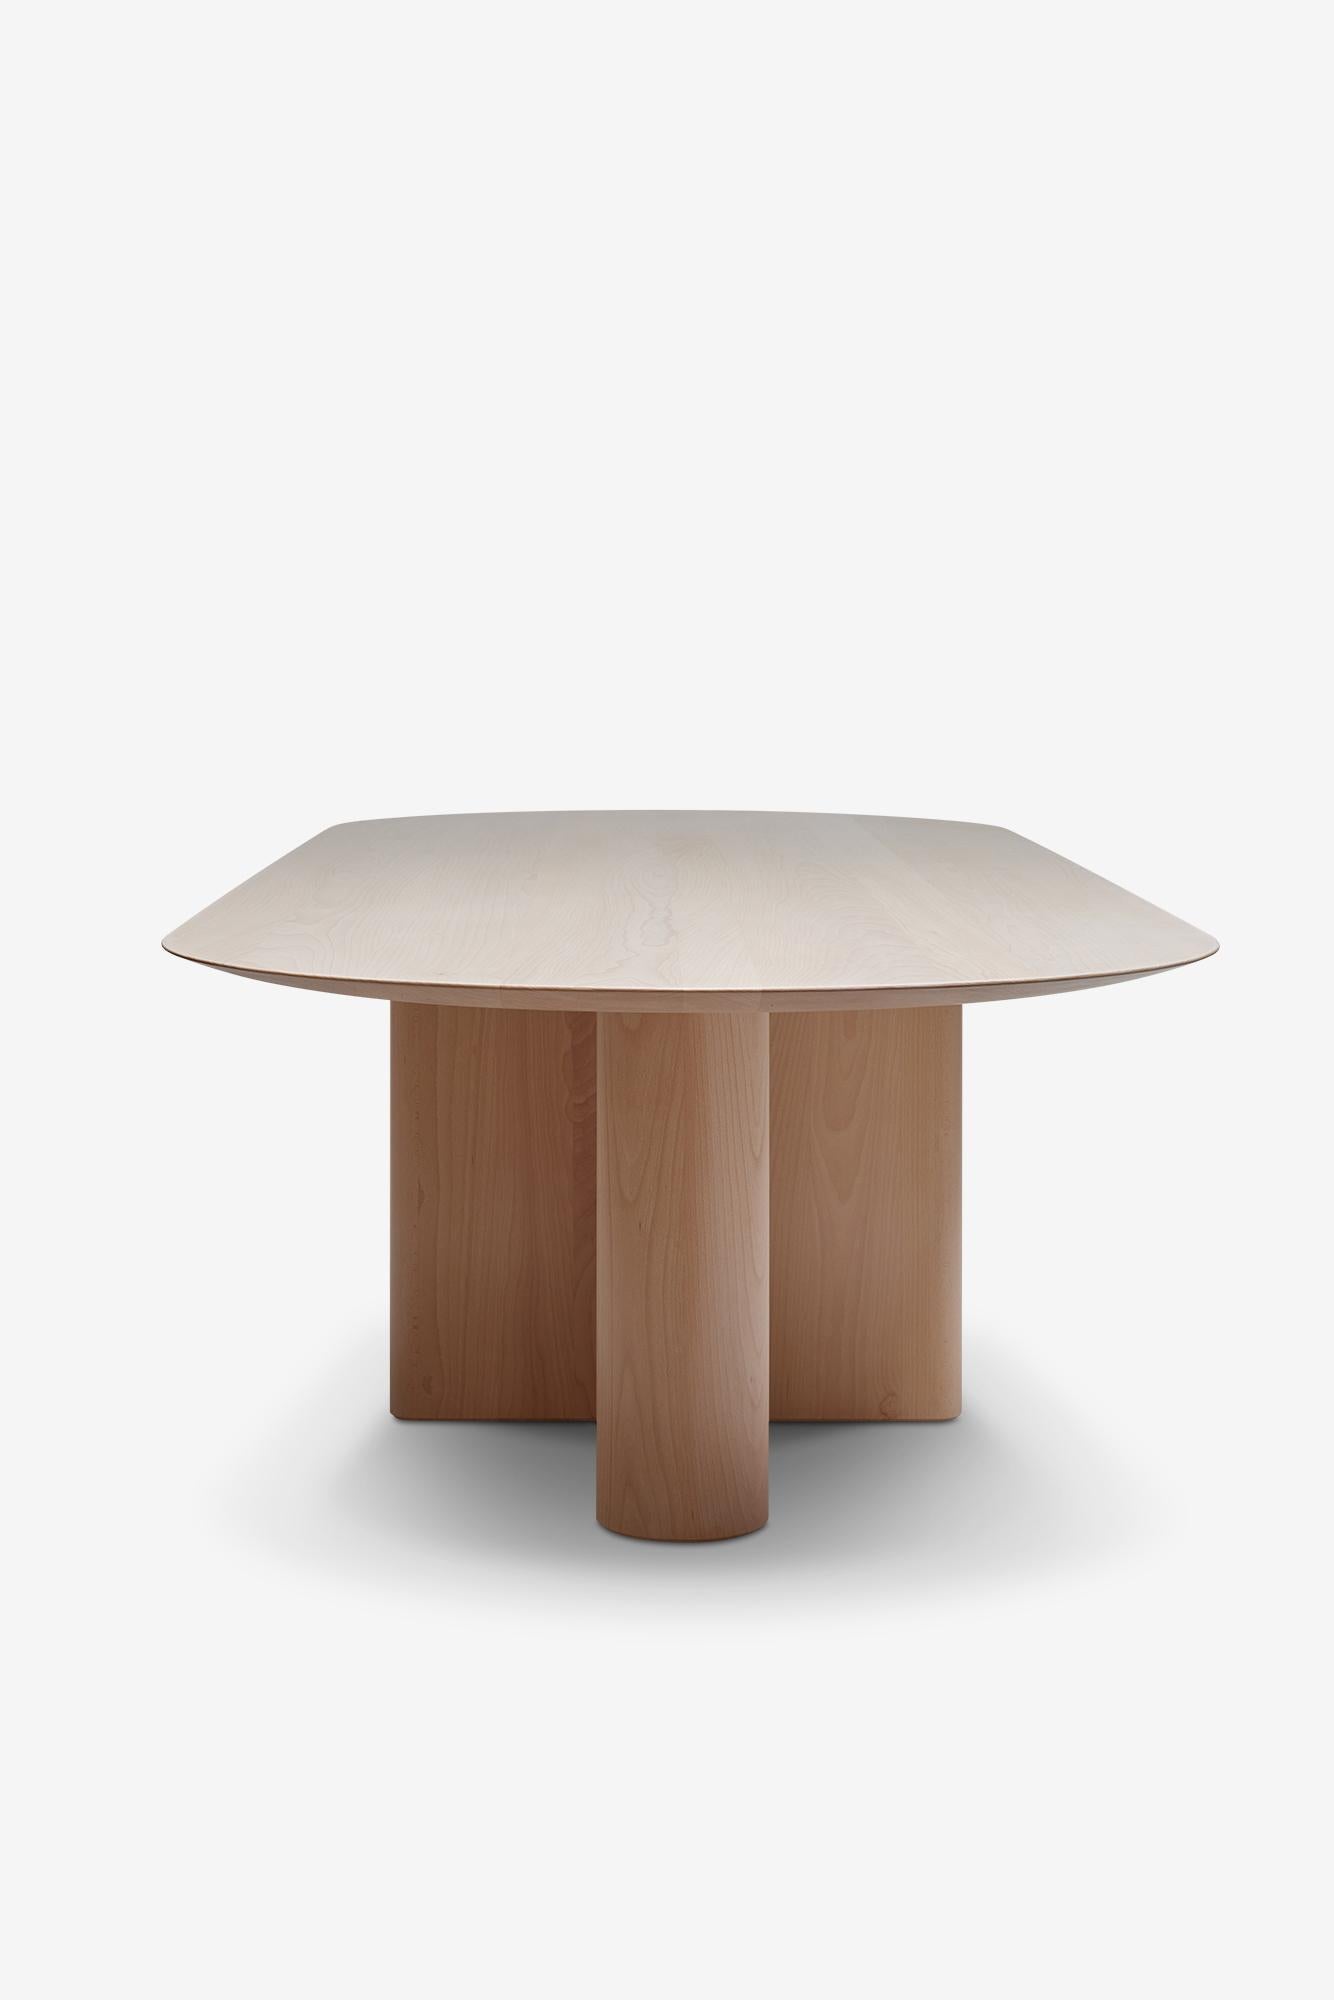 Oiled MG210 Dining Table in Danish beech by Malte Gormsen design by Norm Architects For Sale